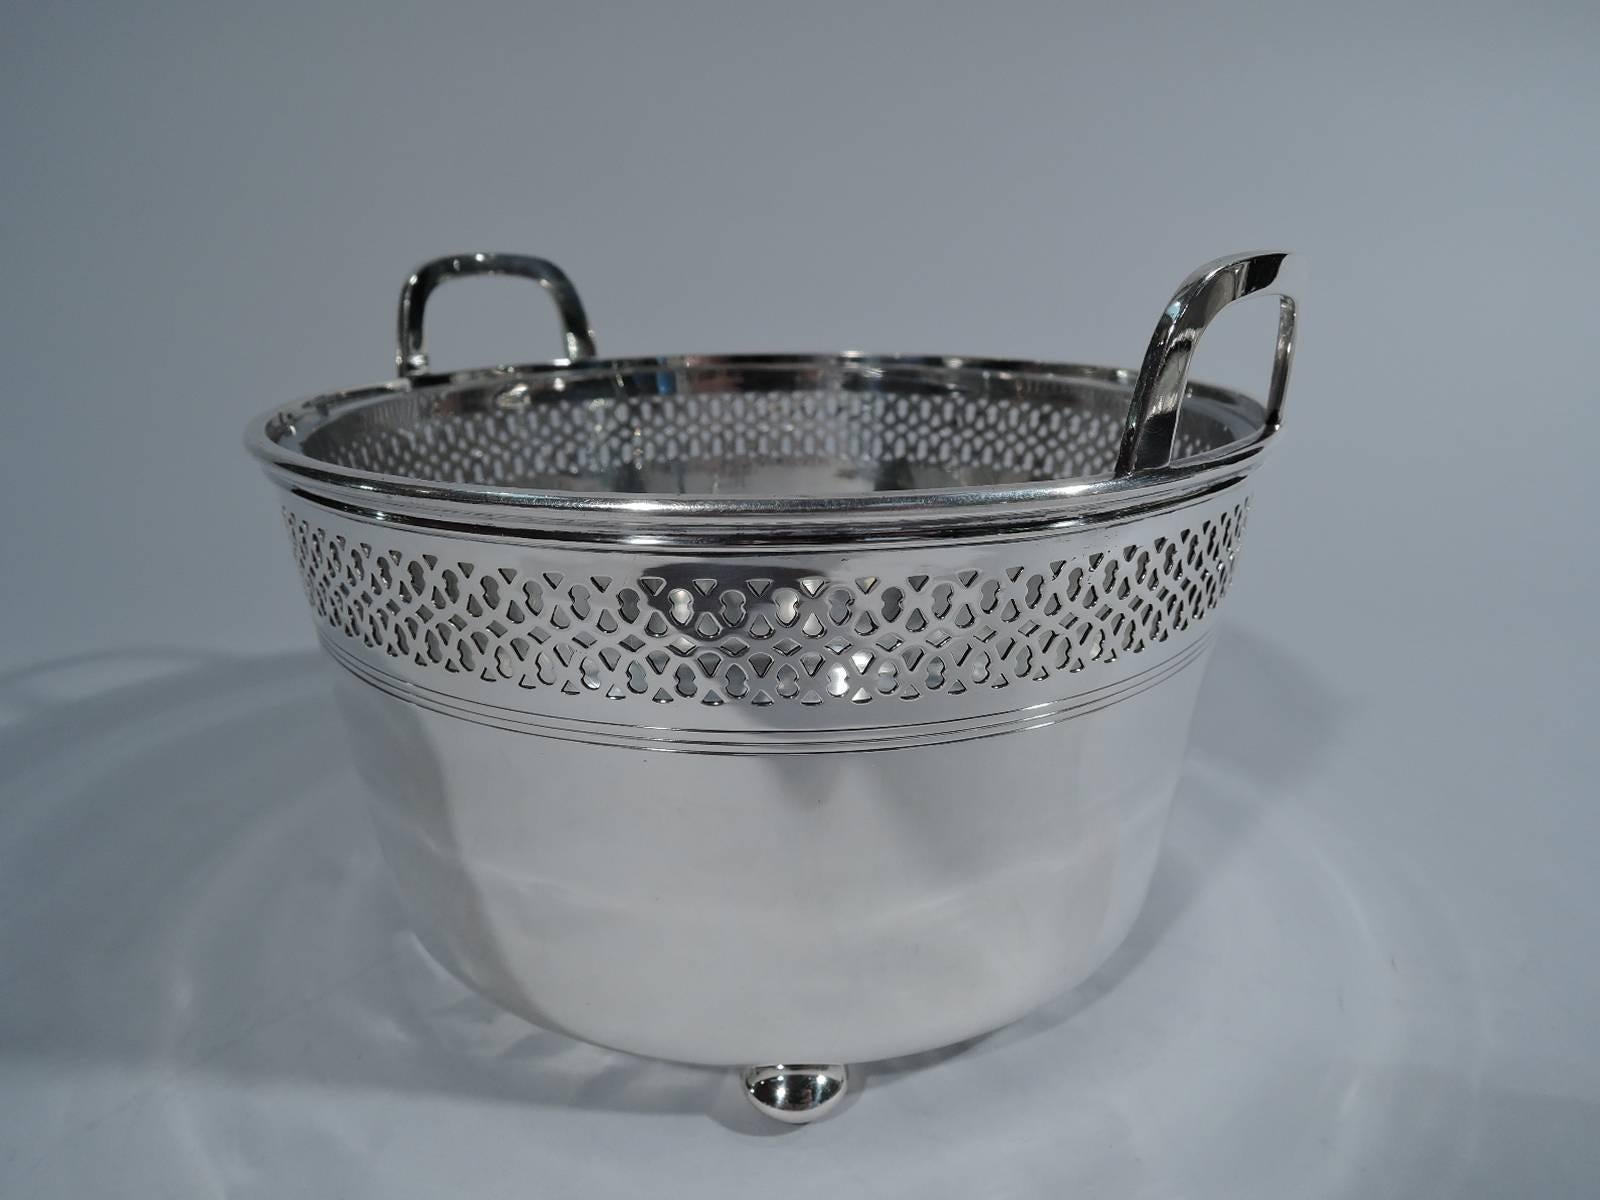 Edwardian sterling silver ice bucket. Made by Tiffany & Co. in New York, circa 1908. Straight and tapering sides, bracket handles mounted to rim, and four ball supports. Pierced interlacing and incised banding. Detachable clear glass liner with star